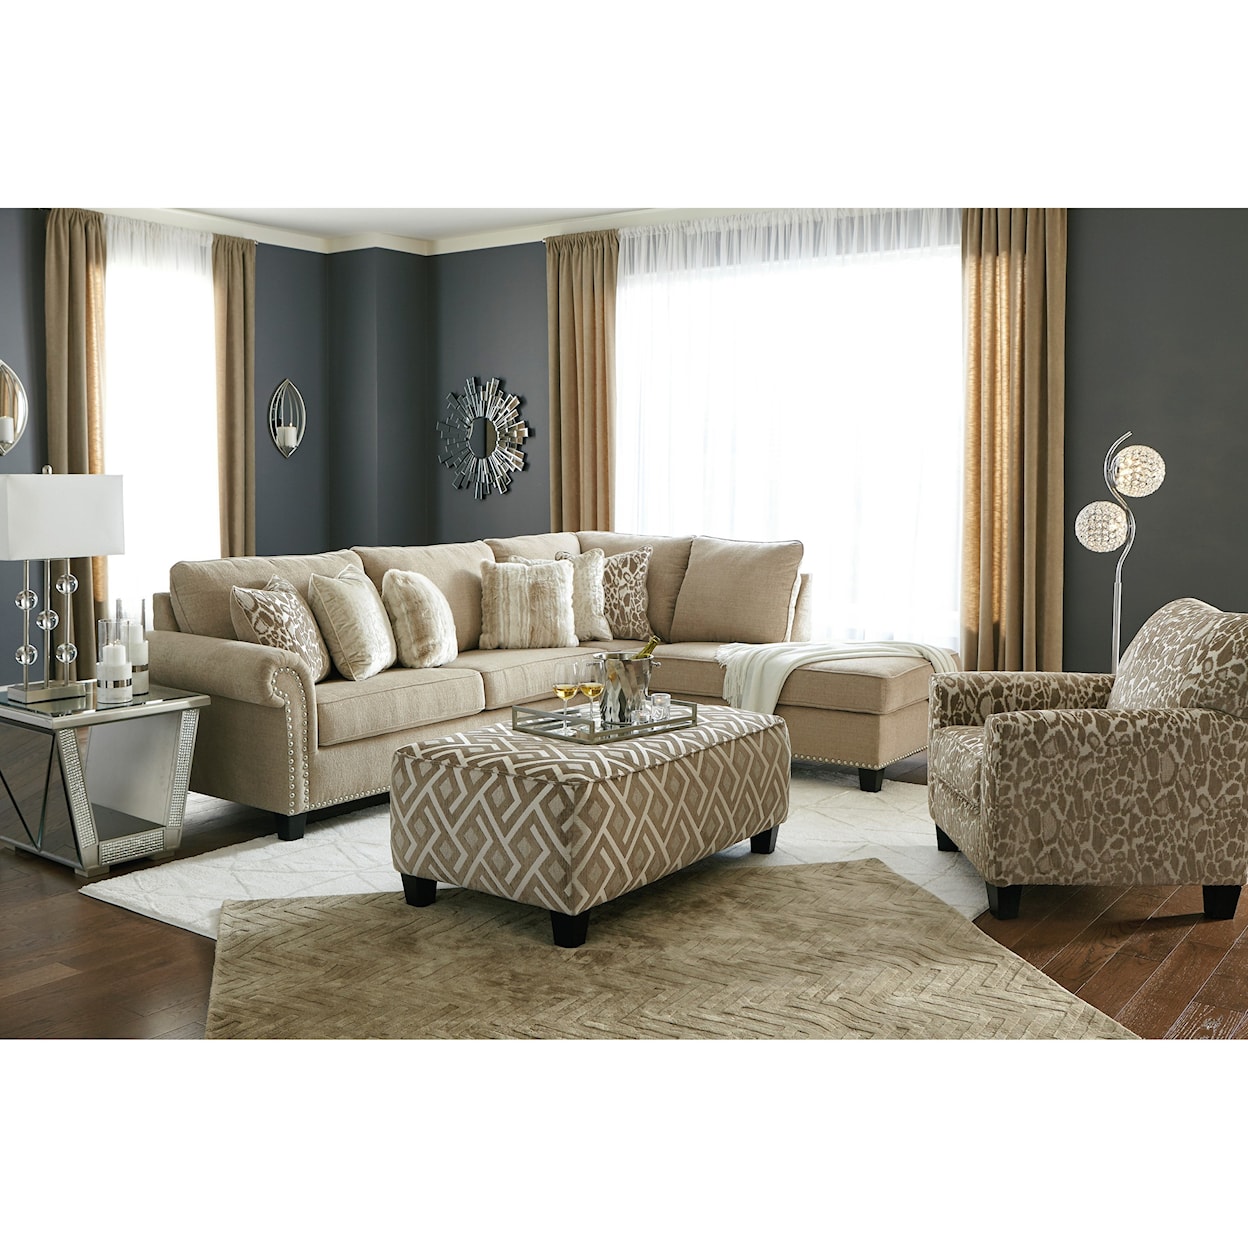 Signature Design by Ashley Furniture Dovemont Living Room Group